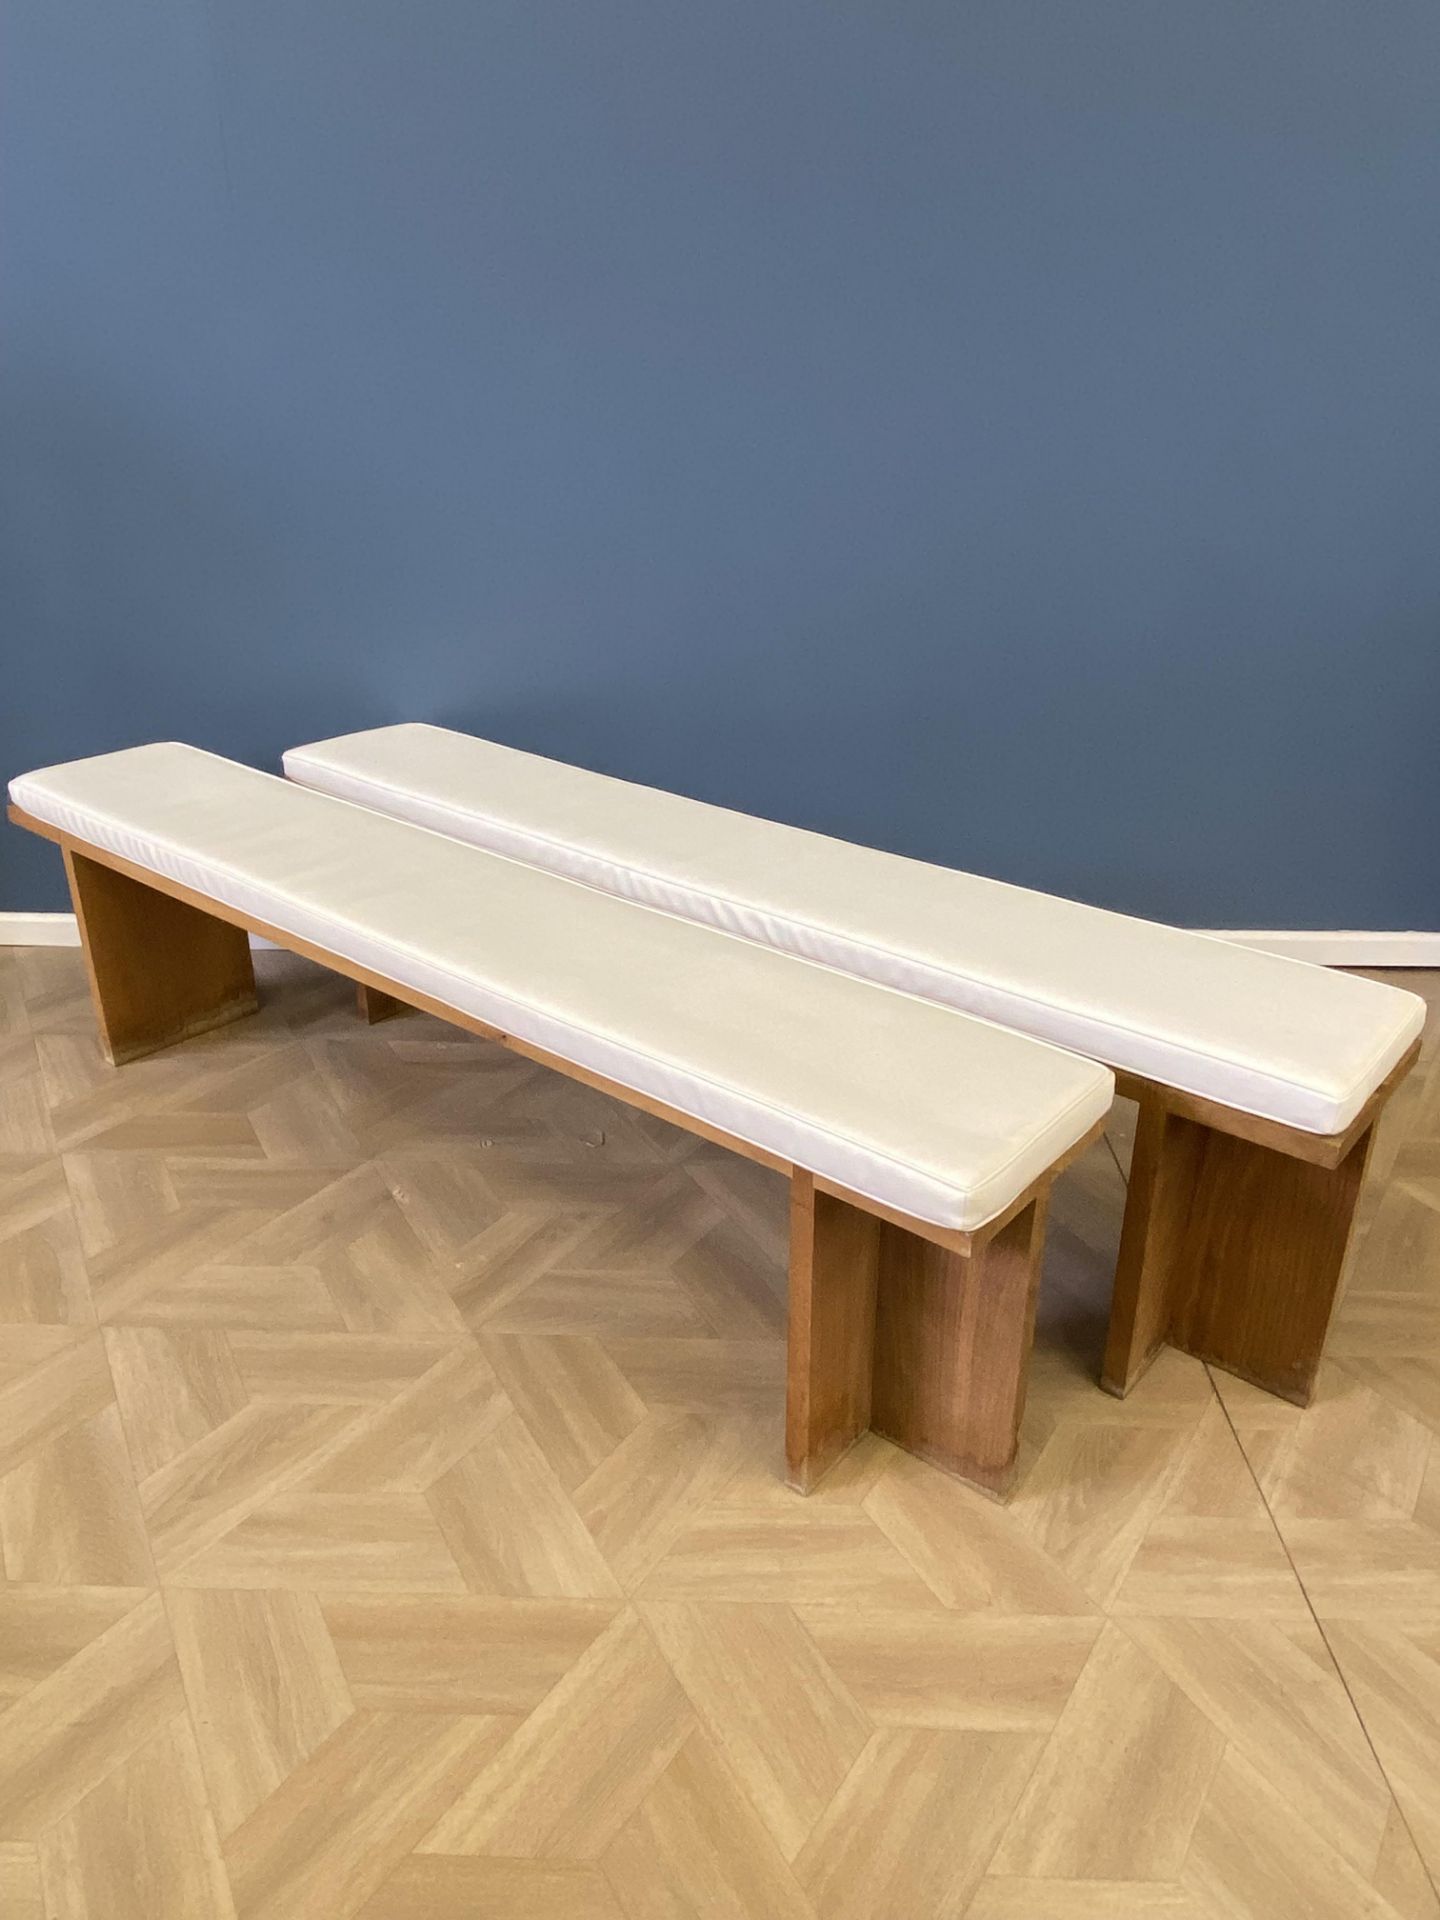 Pair of solid oak pool benches - Image 3 of 7